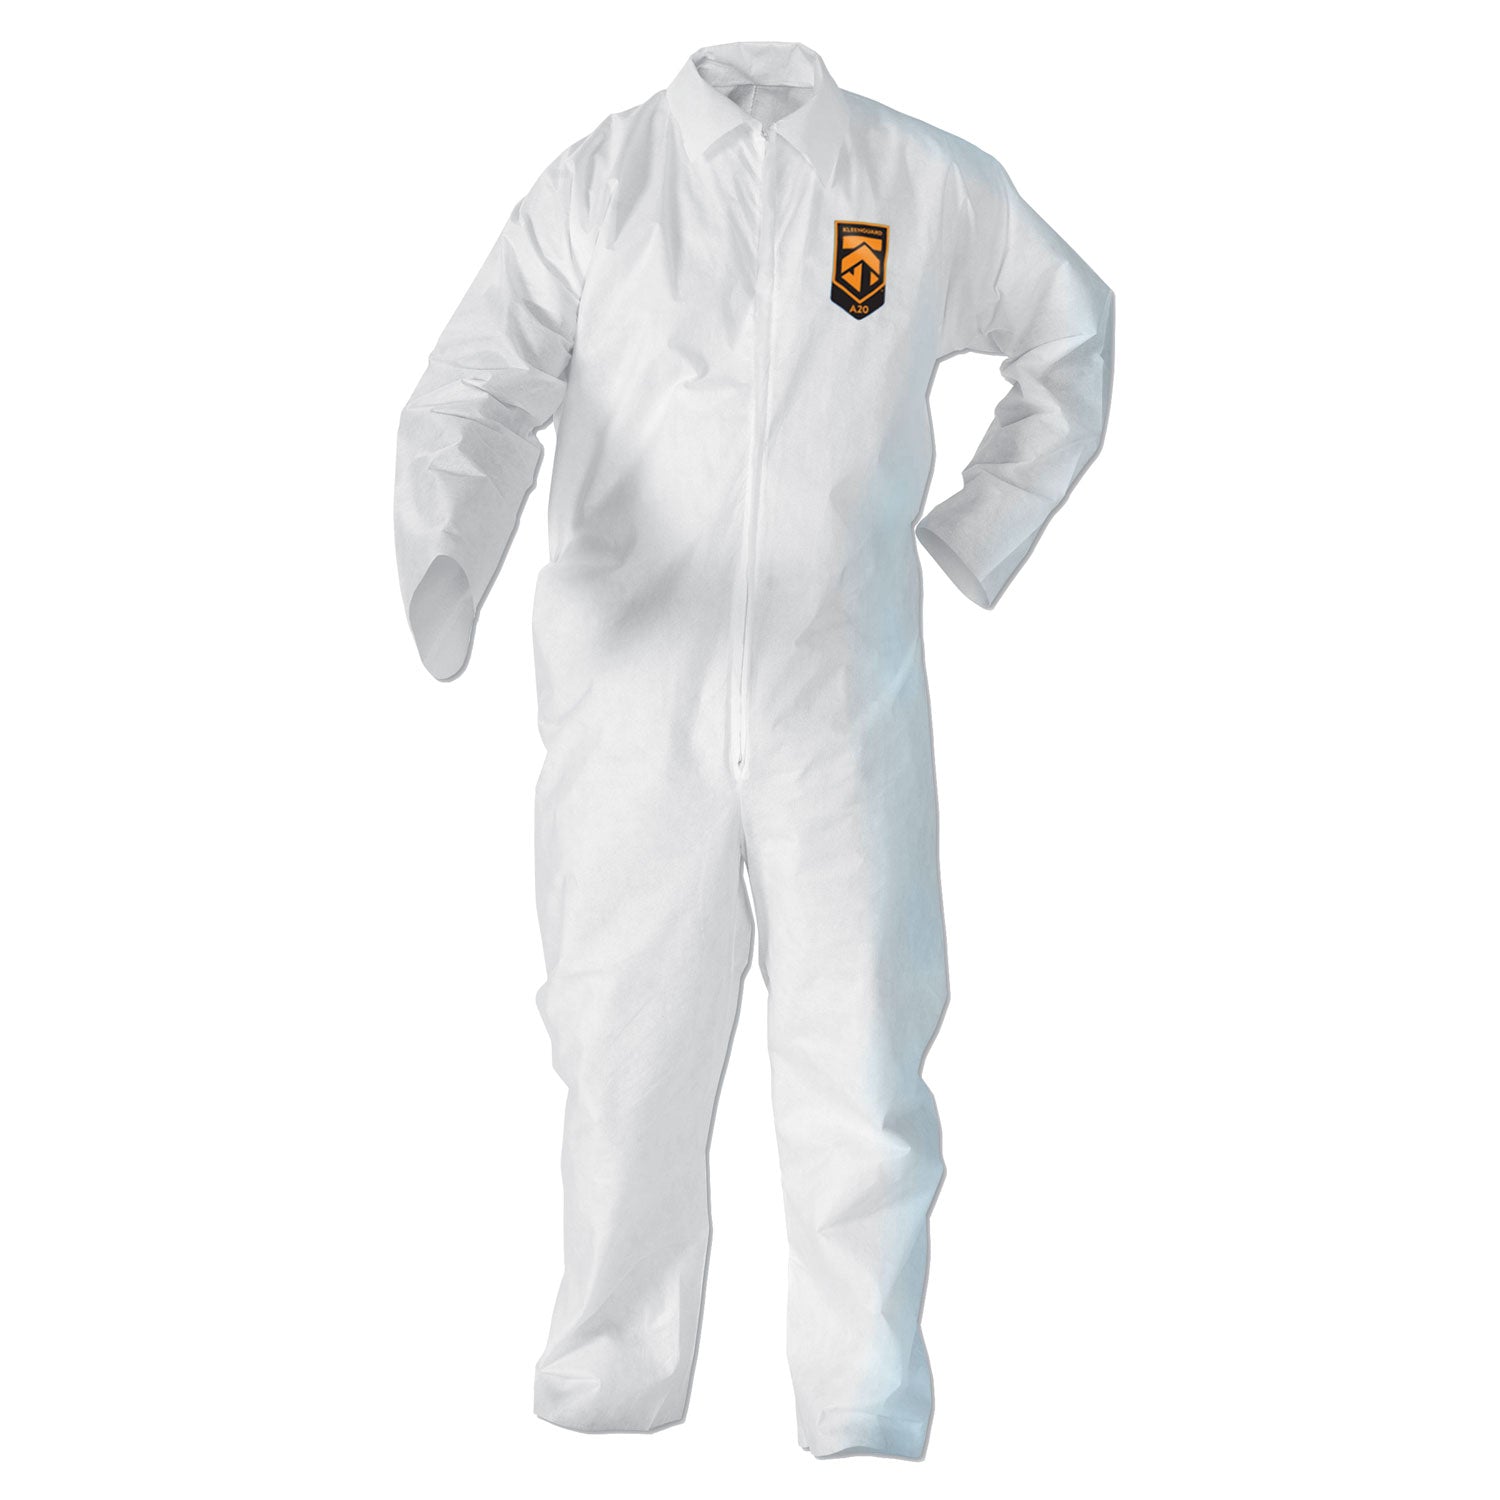 a20-breathable-particle-protection-coveralls-zip-closure-x-large-white_kcc49104 - 1